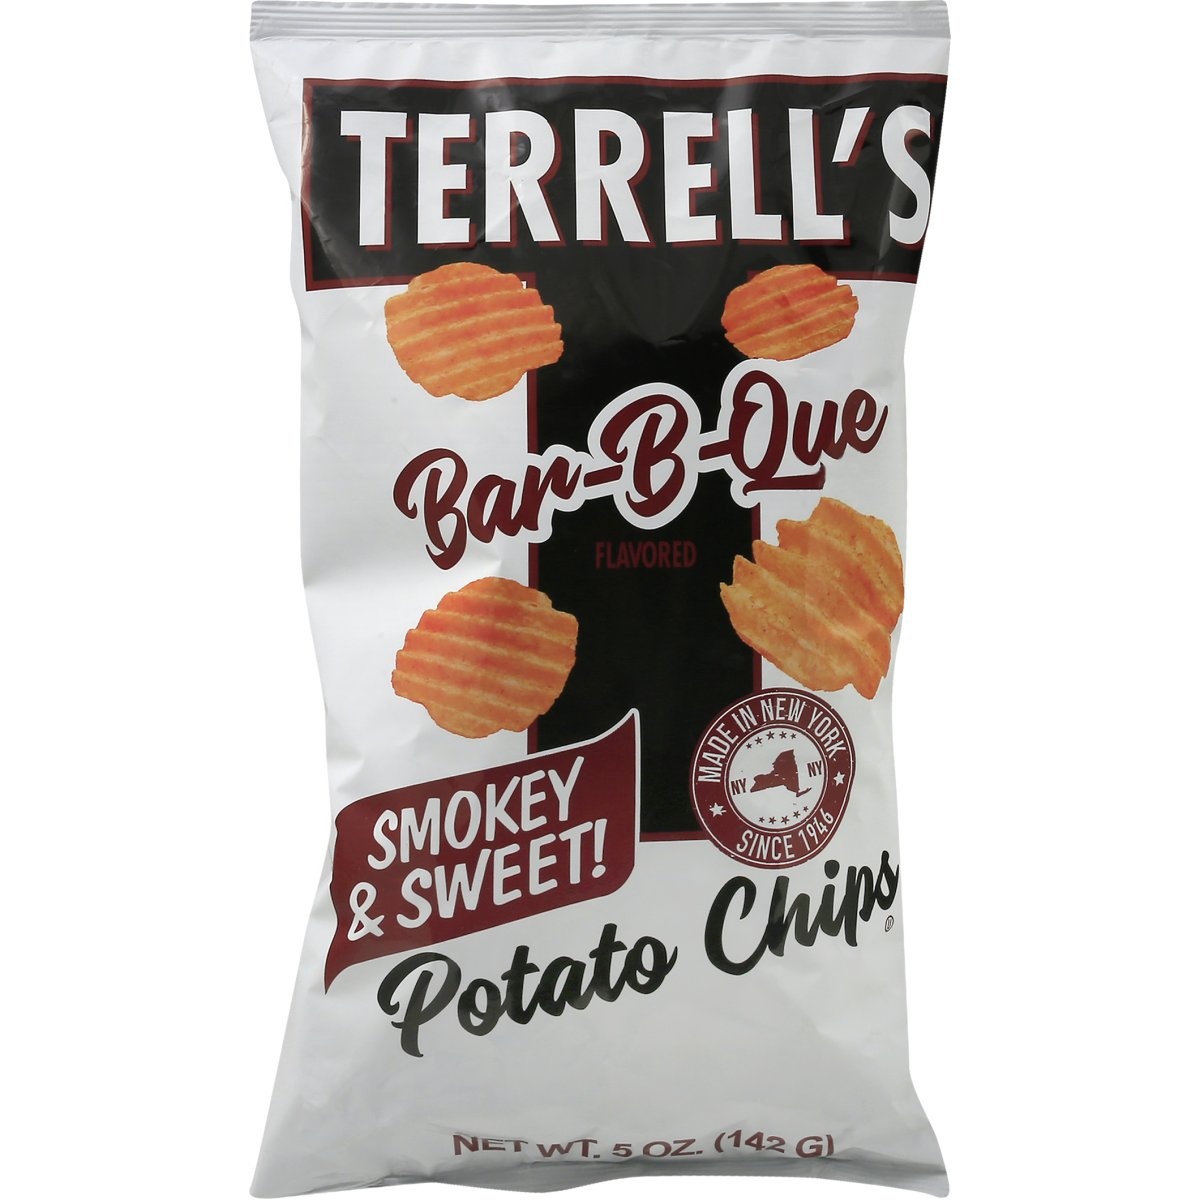 slide 1 of 1, Terrell's Bar-b-que Flavored Chip, 5 oz